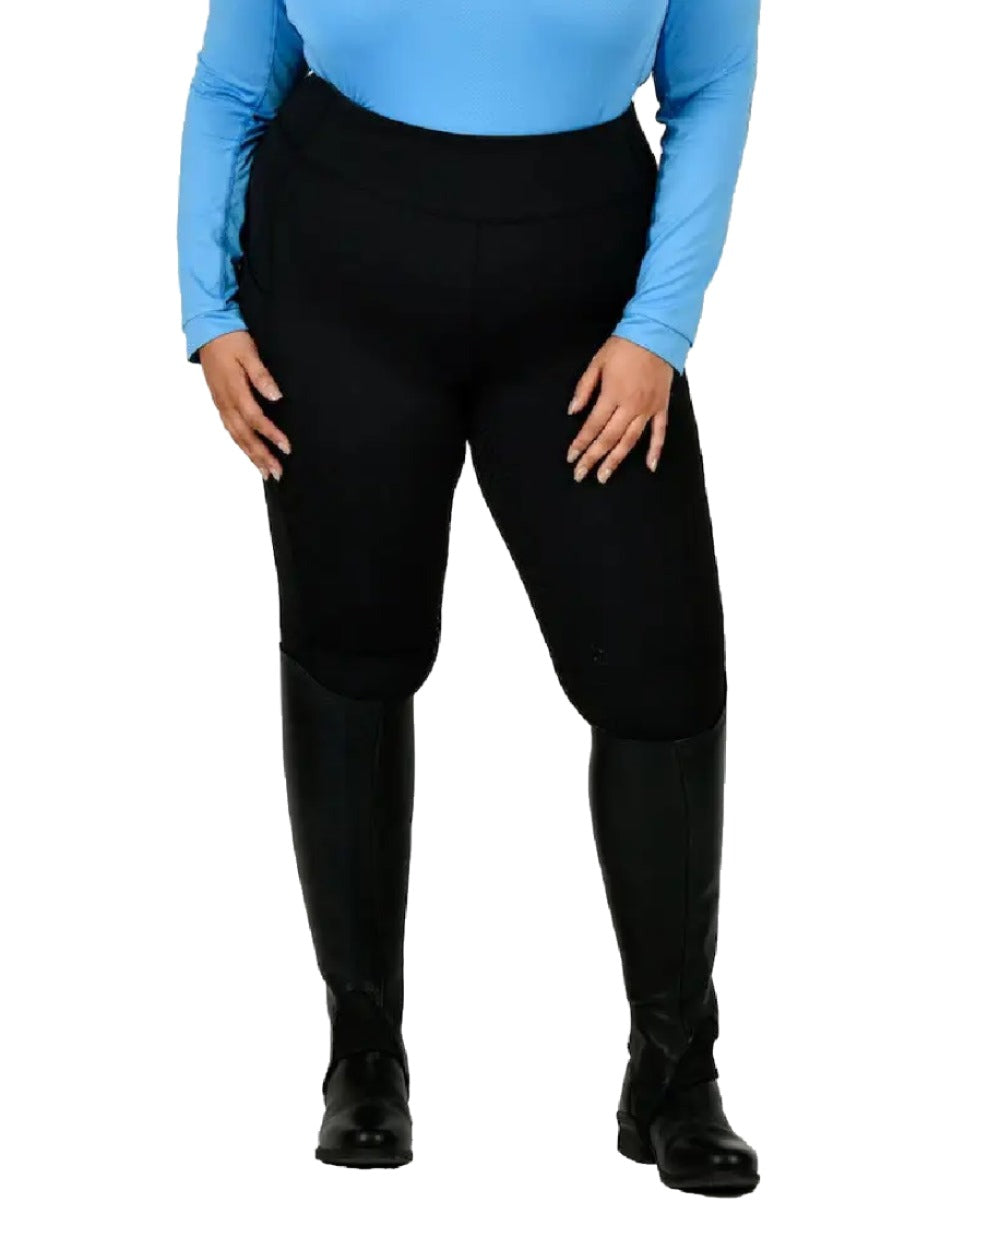 Black coloured Dublin Curve Everyday Riding Tights on white background 